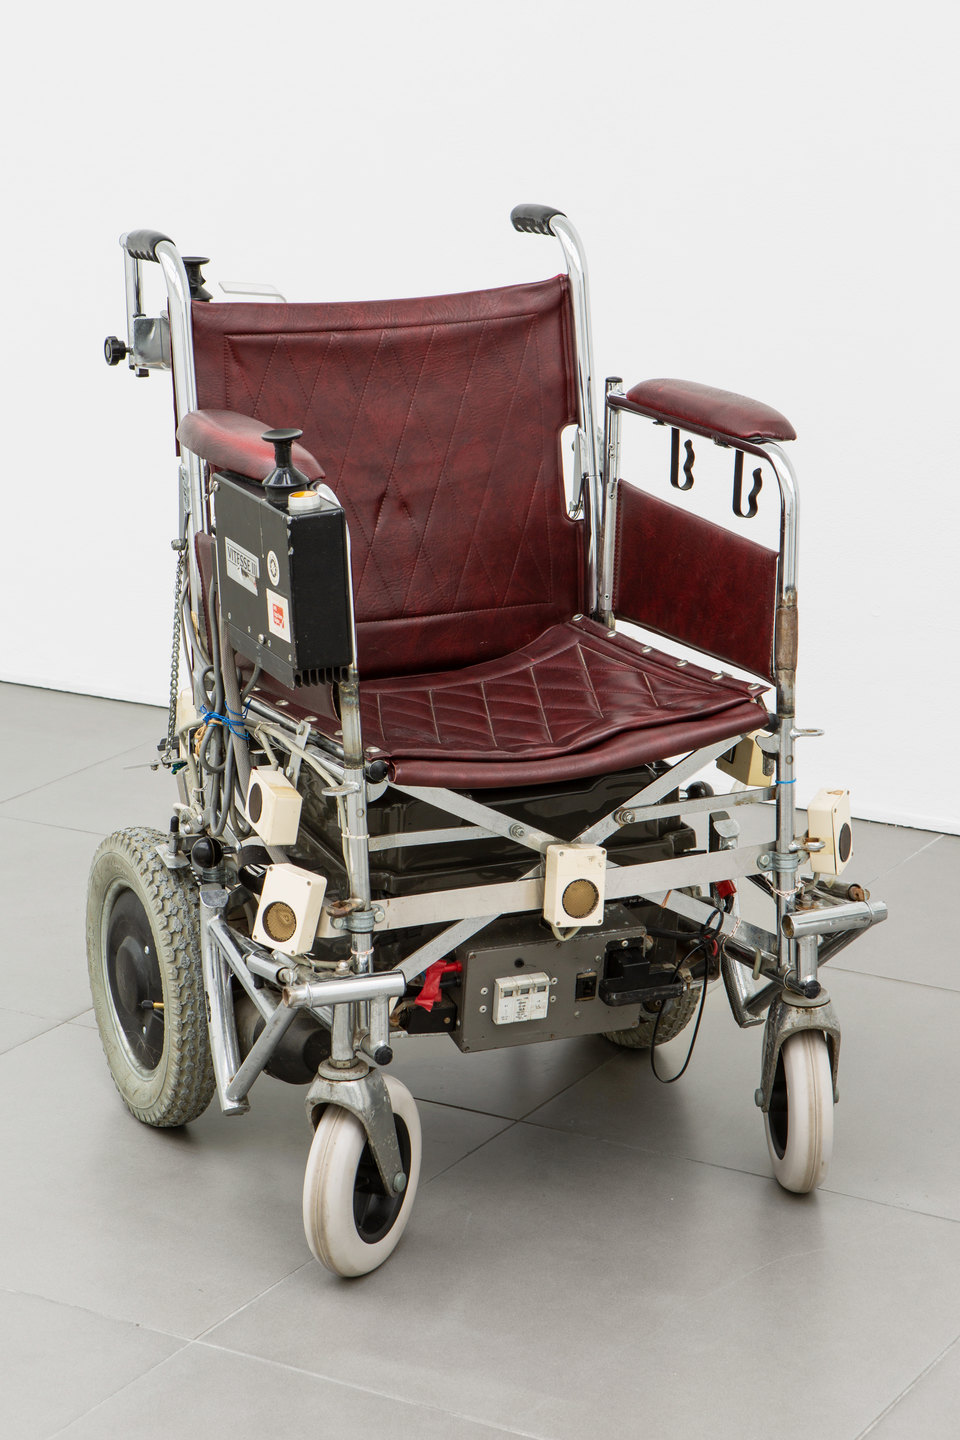 Donald Rodney, 'Psalms', 1997, Wheelchair, computer, proximity sensors, 95 x 65 x 70cm, Civic Duty, 2019, Cell Project Space